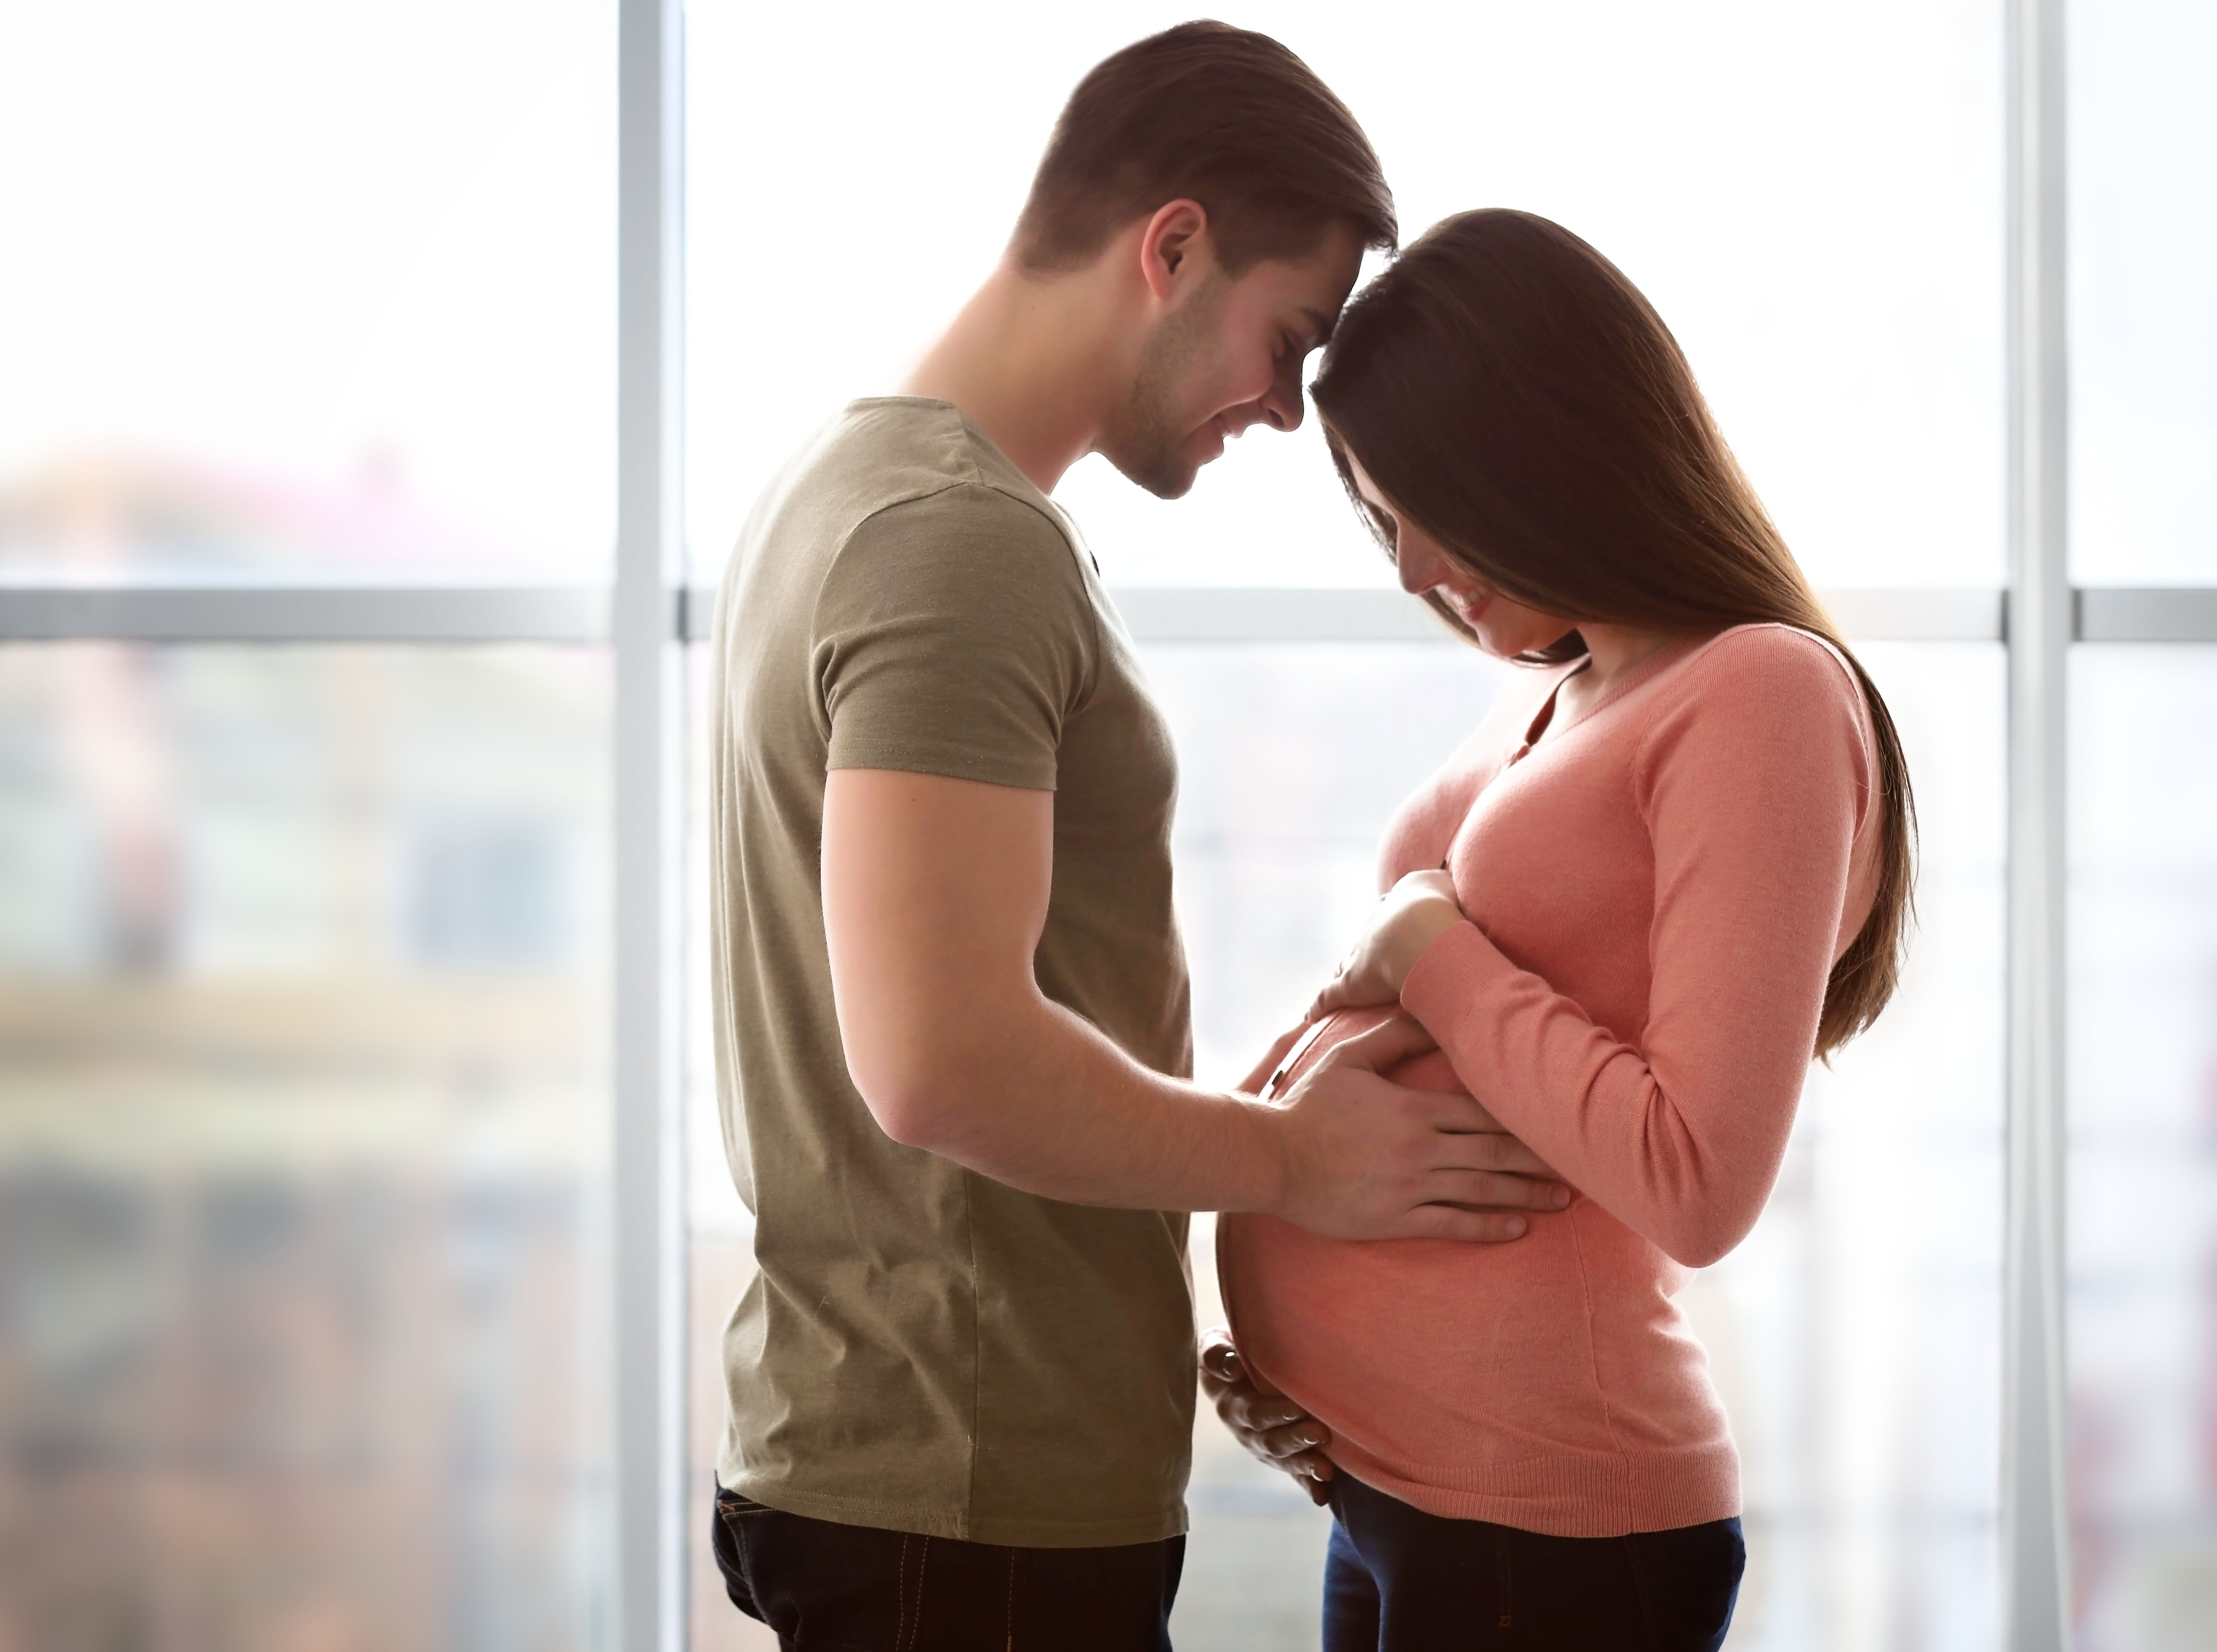 A woman looking down at her pregnant belly as her husband rests his forehead on hers | Source: Shutterstock